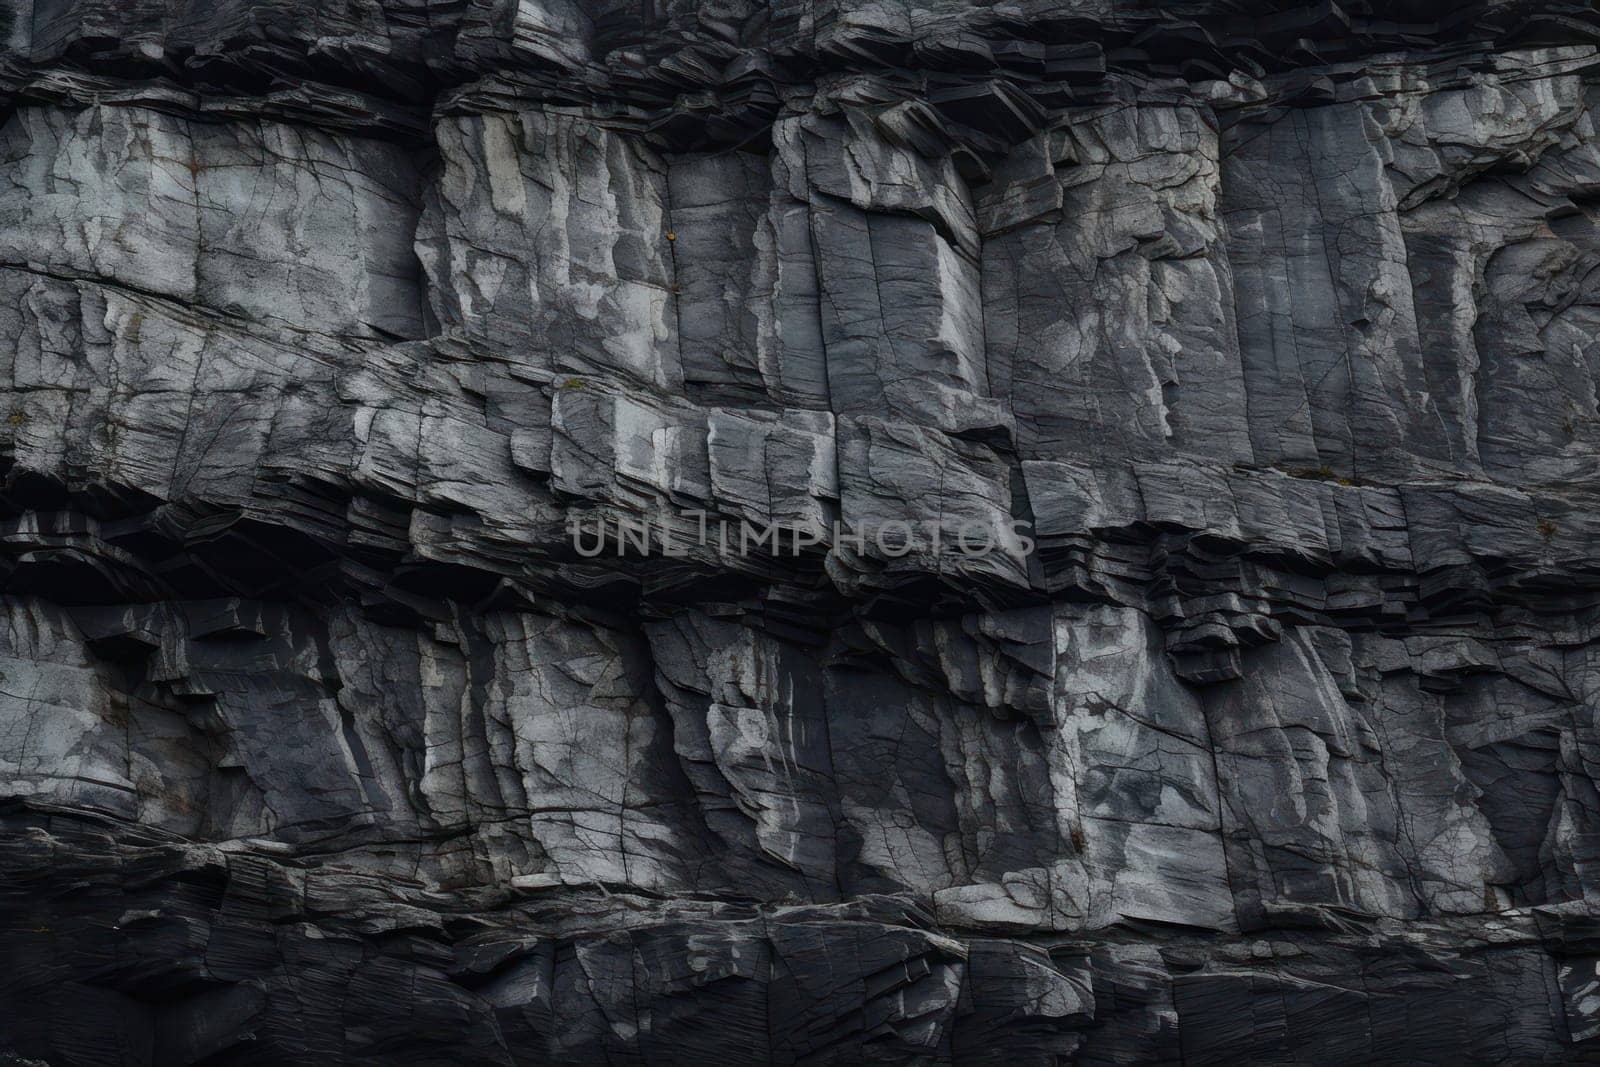 Nature's Textured Tapestry: Abstract Rock Patterns on Old Cliff Wall by Vichizh